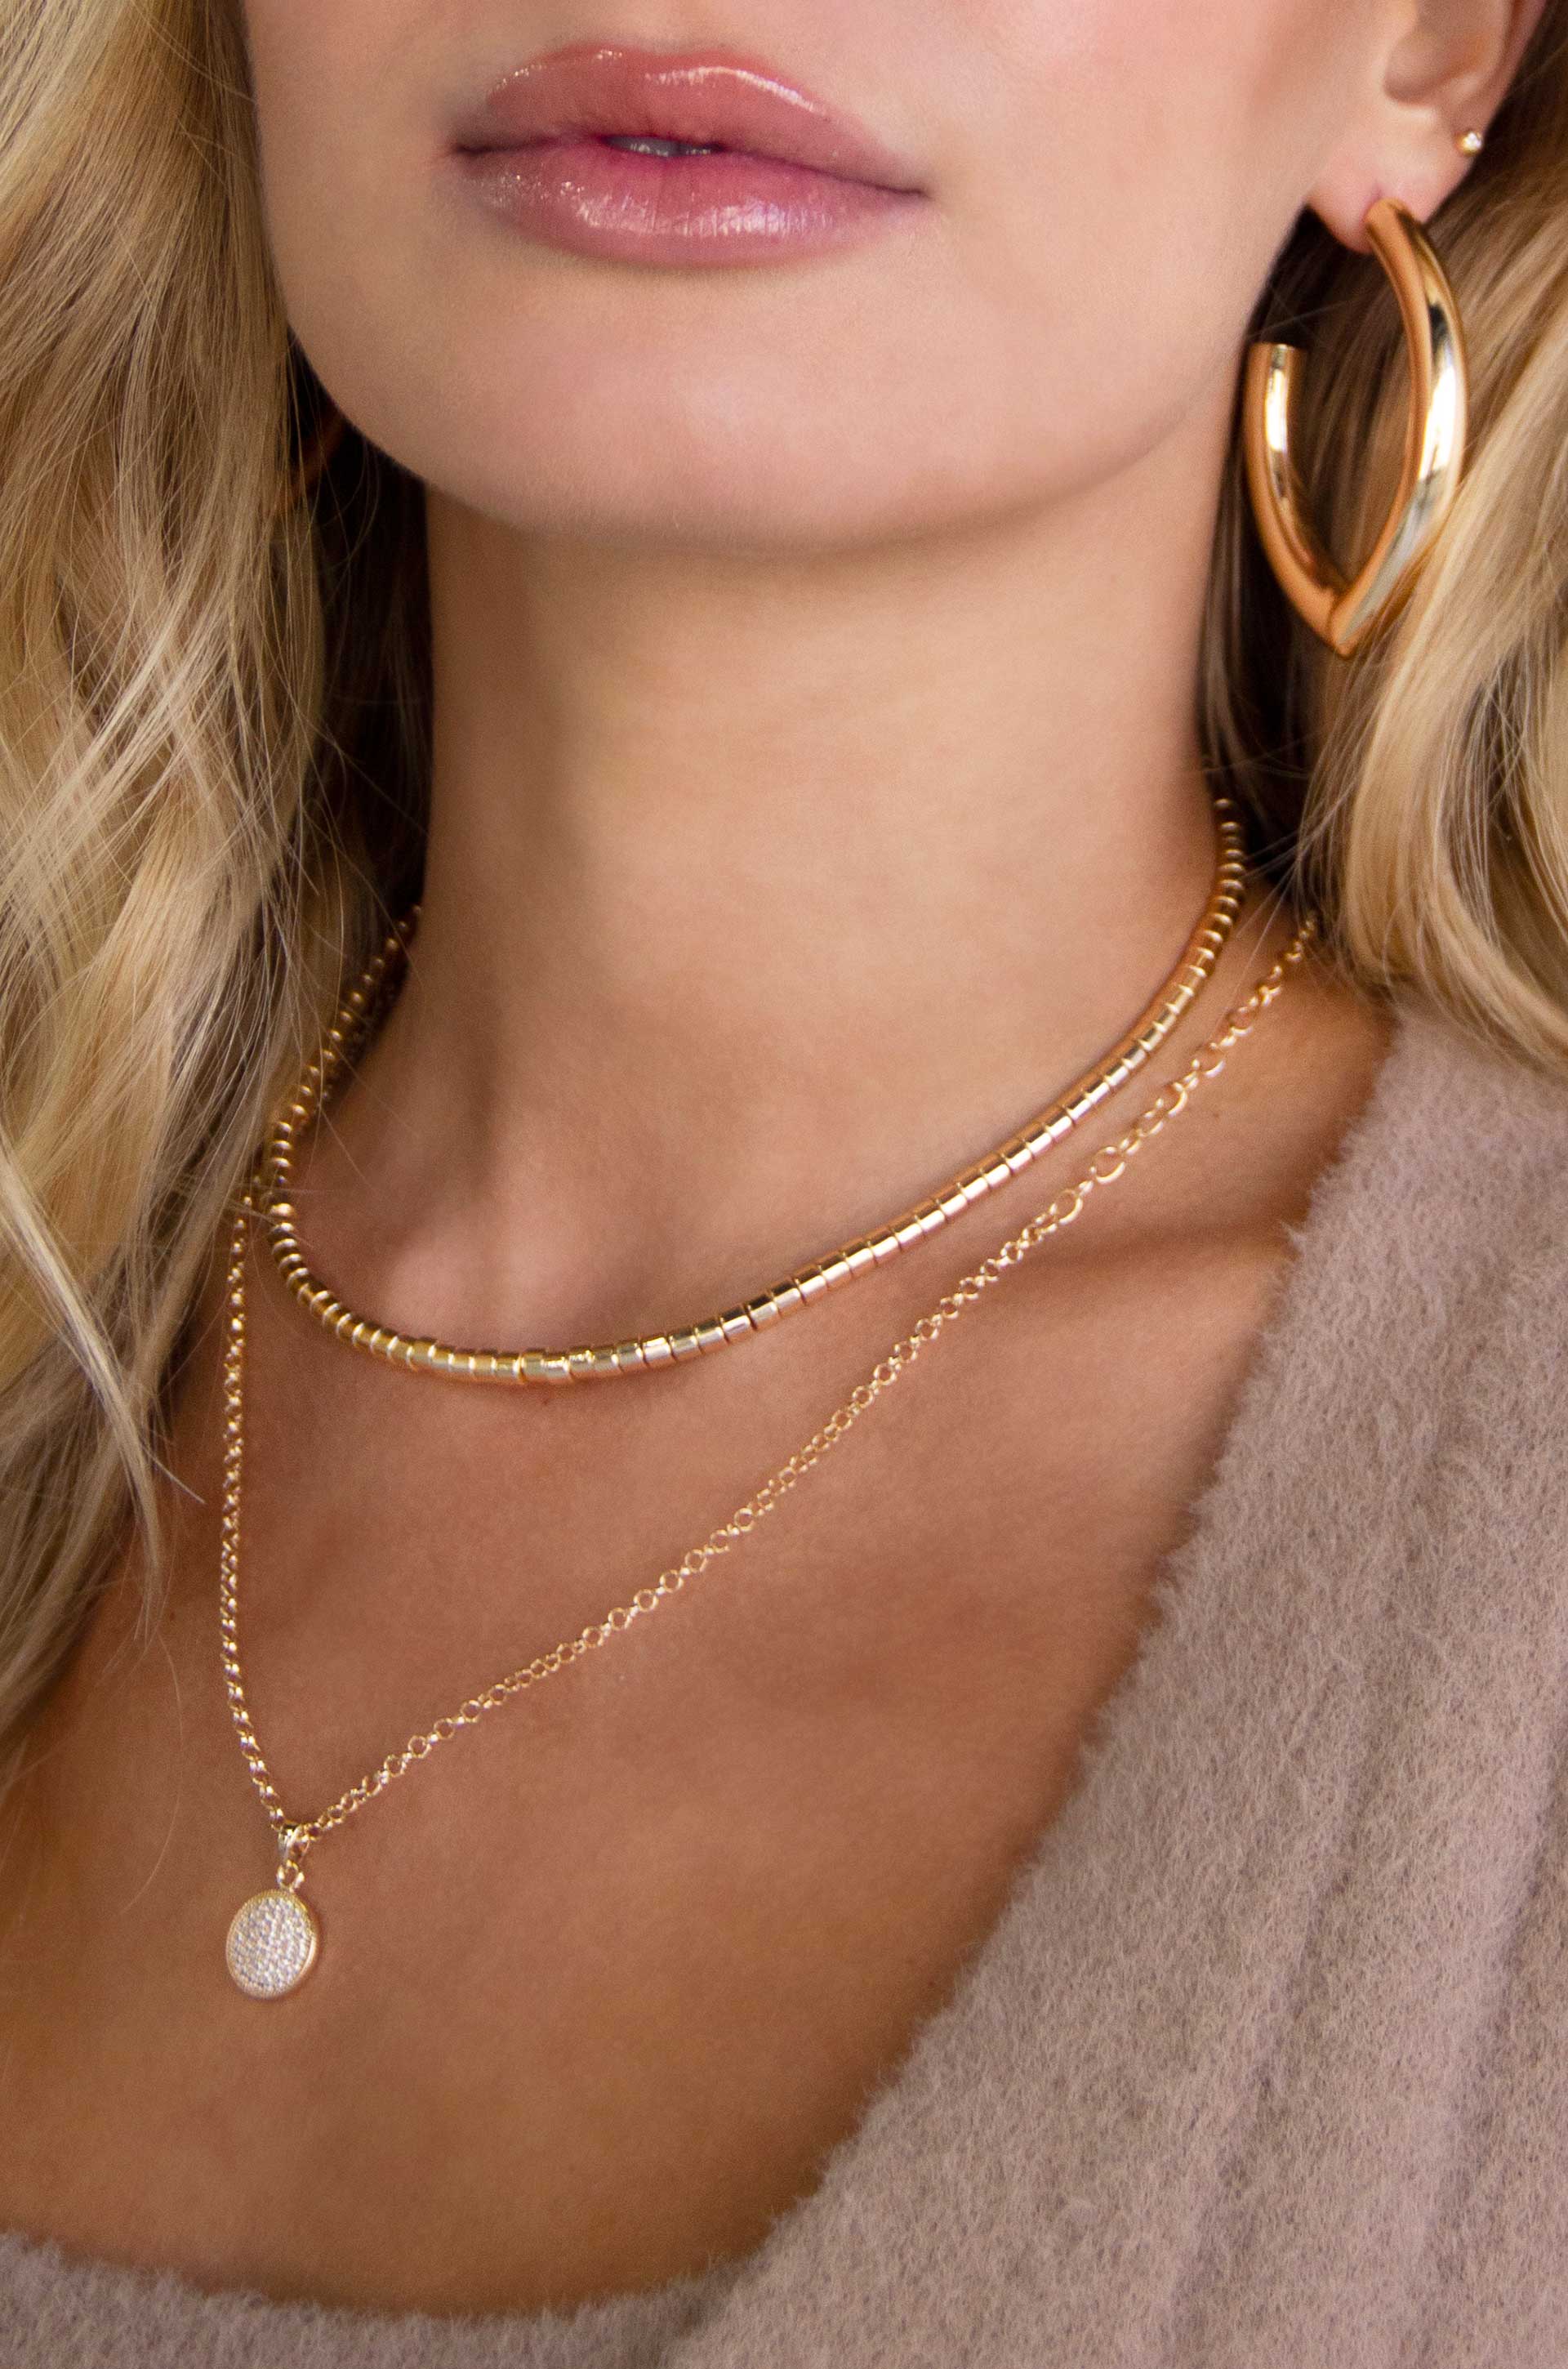 Toggle Layering Necklace Set - Gold Chain Necklace, Gold Layered Necklace, Layering Set, Chain Necklaces, Trendy Necklaces |GFN00006